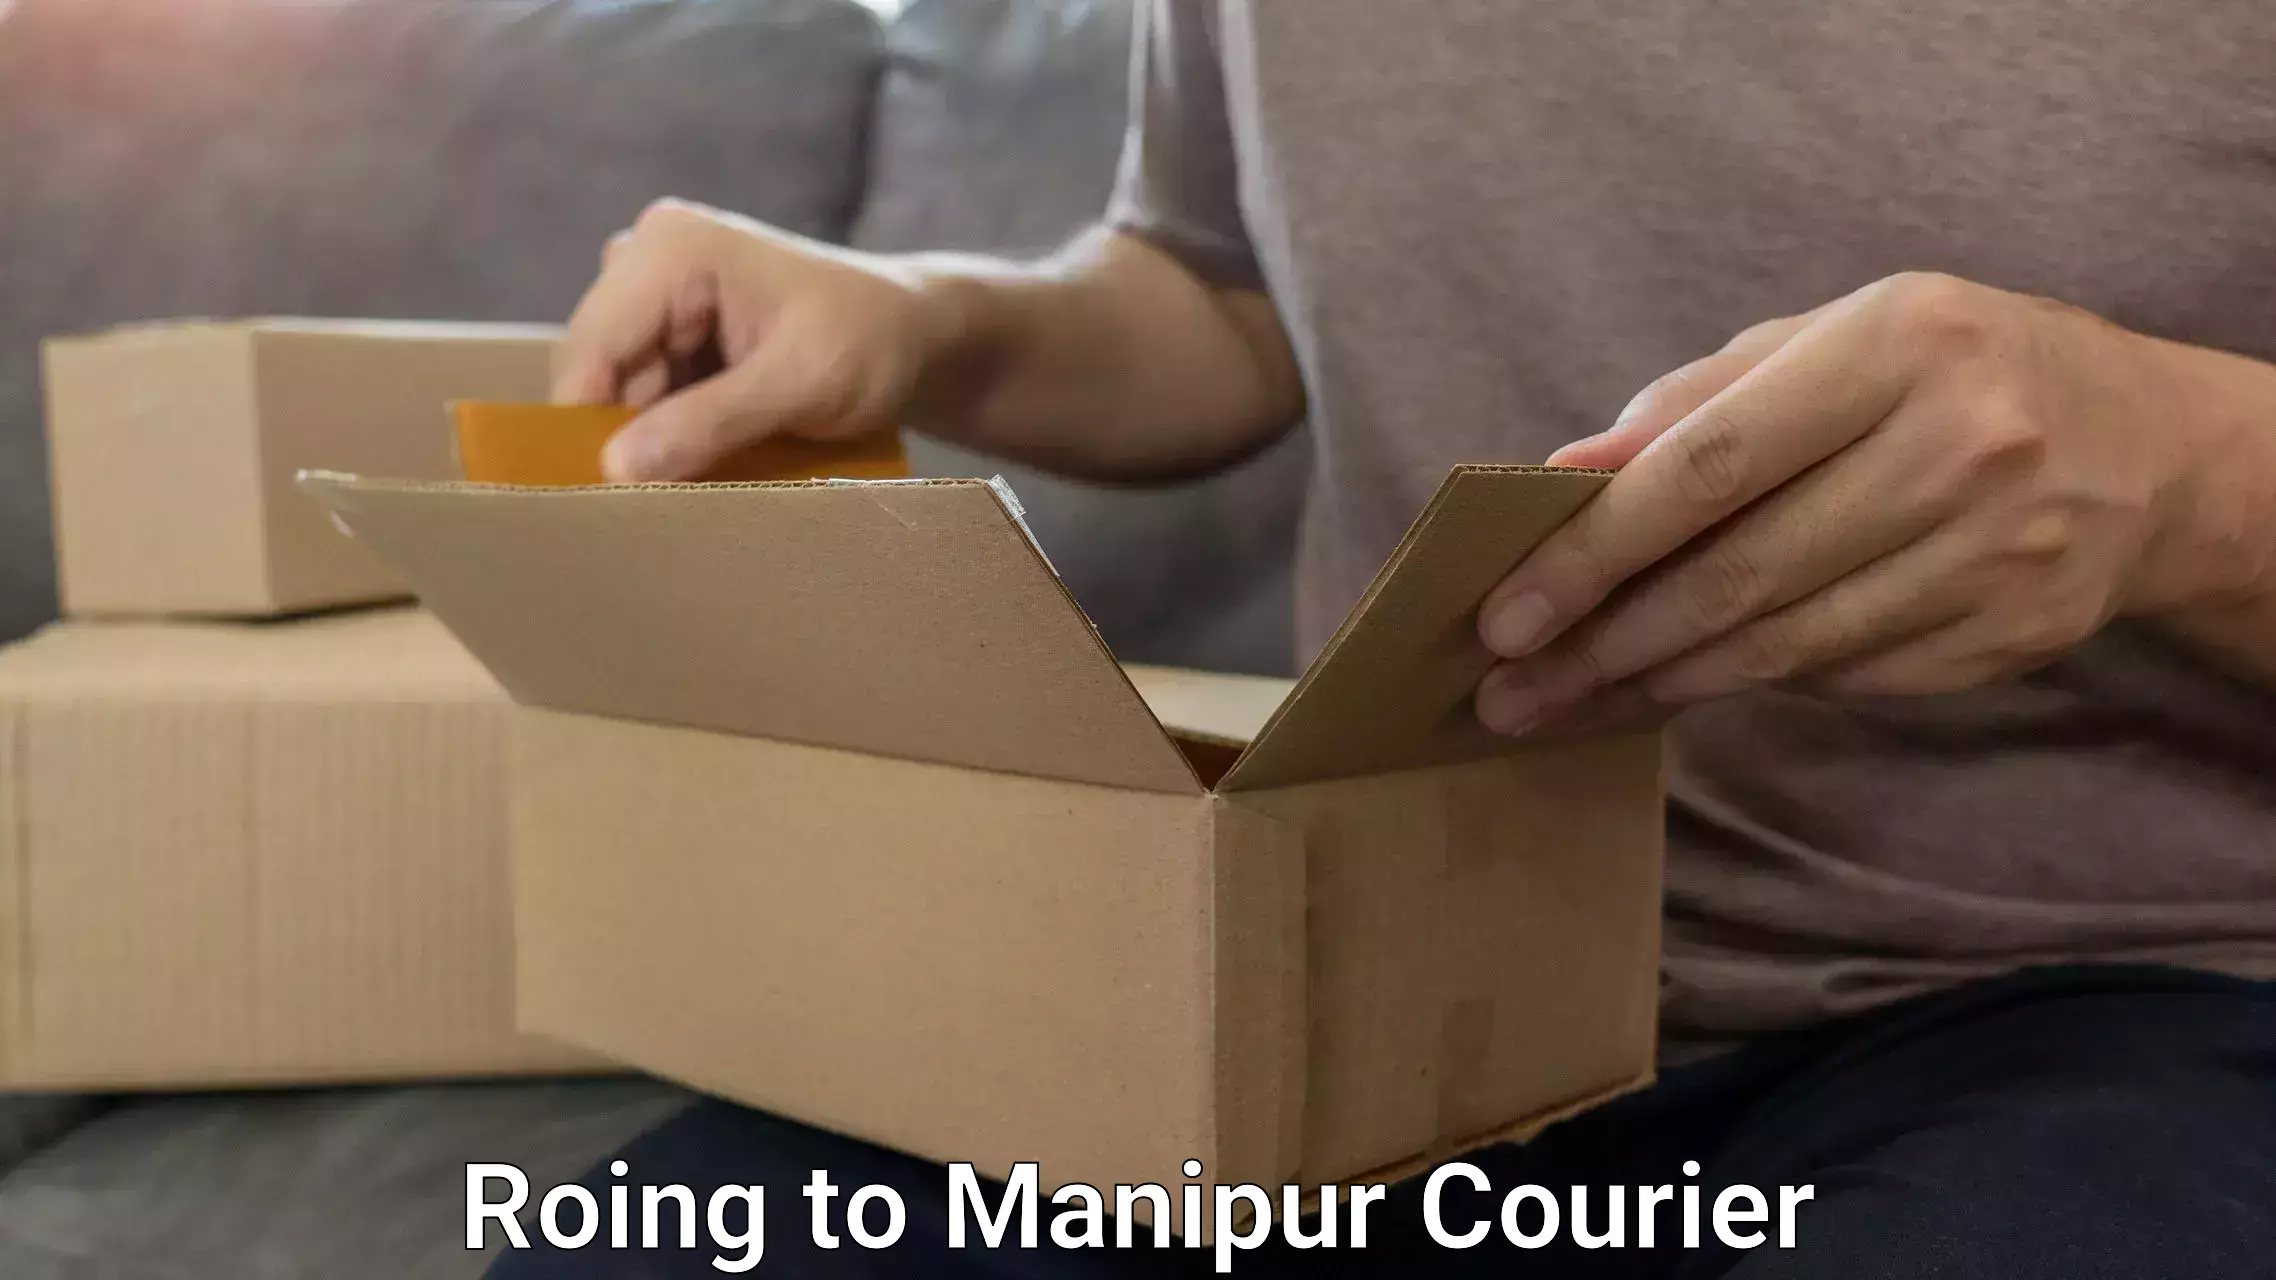 Luggage shipment tracking Roing to Manipur